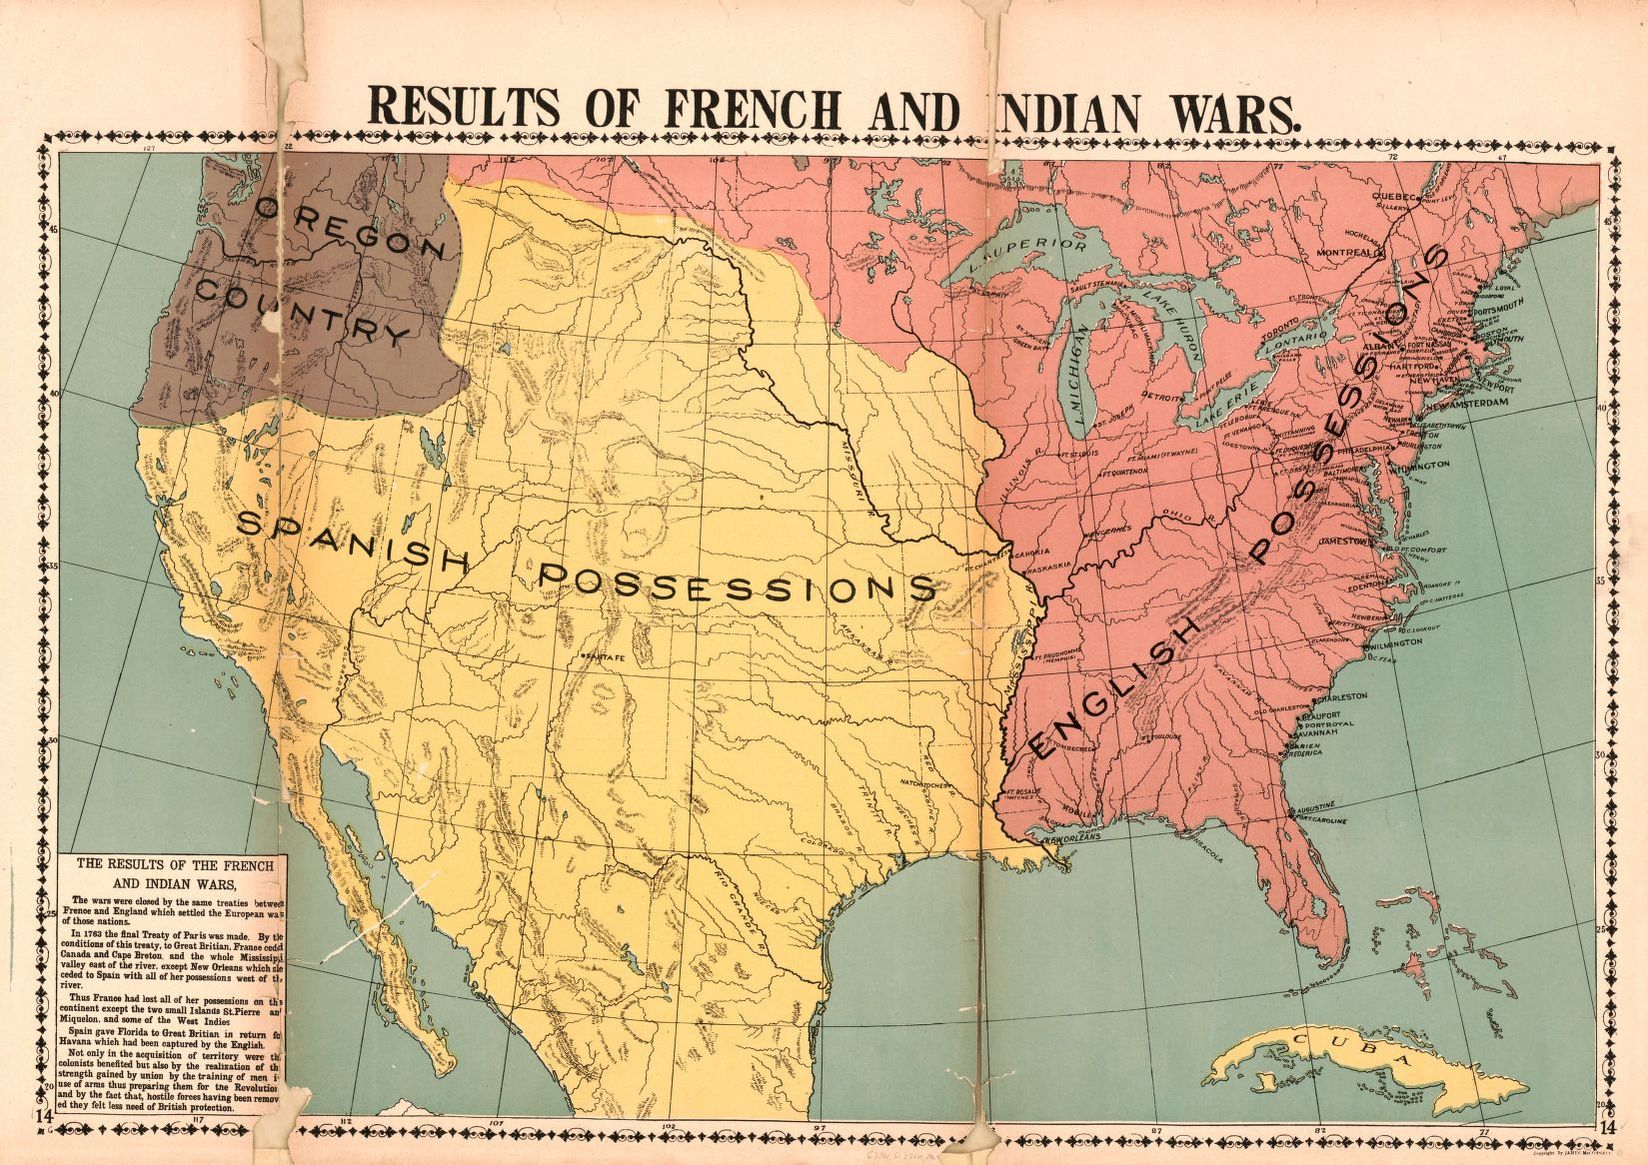 North American colonial territories after 1763